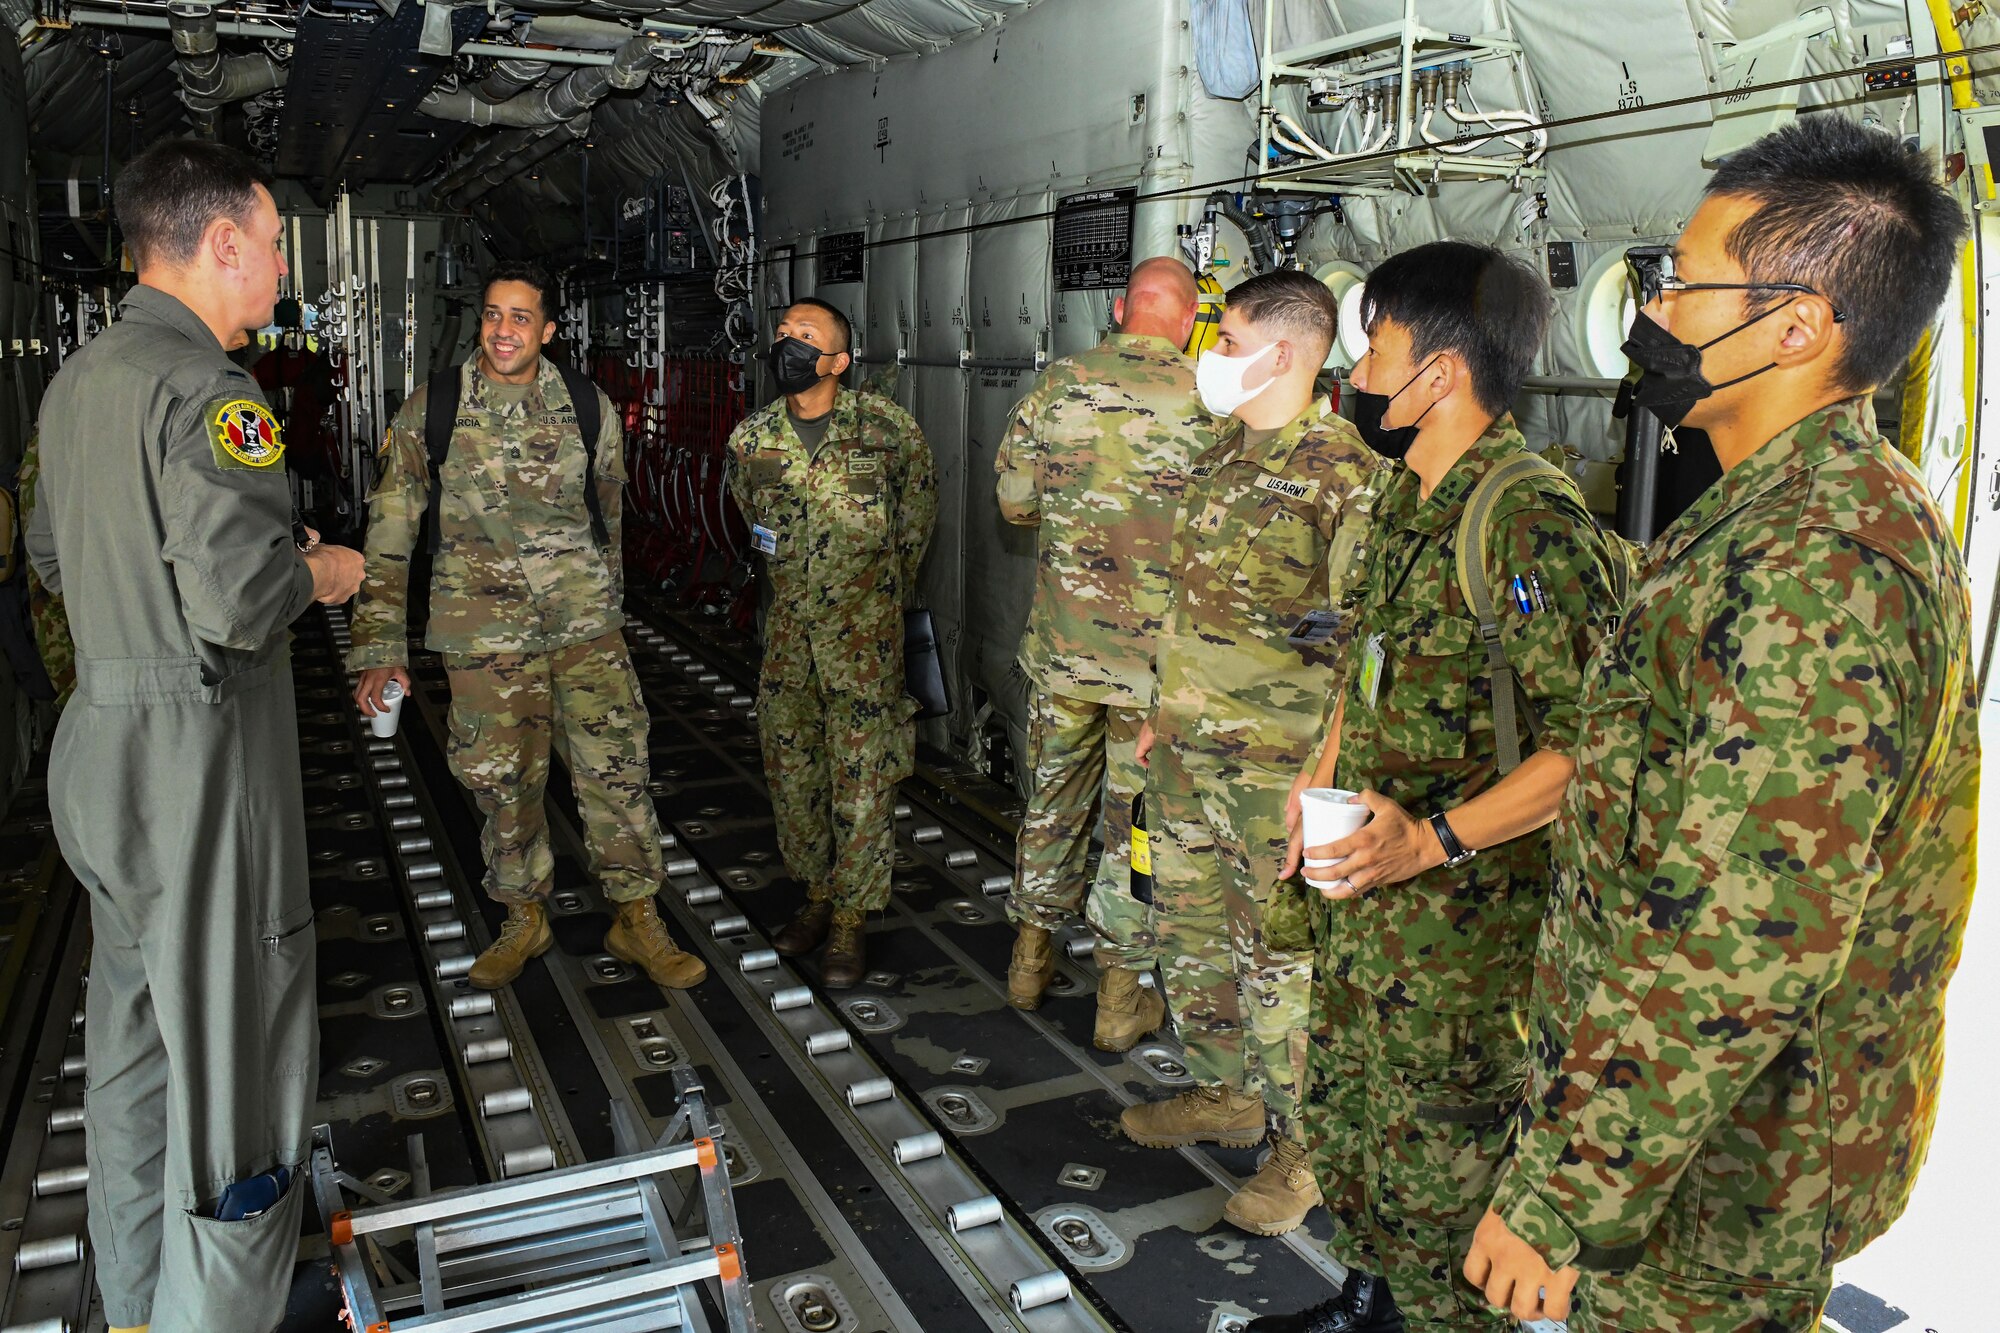 U.S. Air Force 1st Lt. Tate Tatom, 36th Airlift Squadron C-130J Super Hercules pilot, left, briefs Japan Ground Self-Defense Force members on capabilities of the C-130J at Yokota Air Base, Japan, Aug. 9, 2022. Members of the JGSDF along with U.S. Army Soldiers from Camp Zama, Japan, visited Yokota, as part of a six-week cooperative work program. This program is an opportunity for JGSDF and U.S. Army service members to improve bilateral relations, enhance language comprehension skills, learn about each others cultures and familiarize themselves with bilateral military doctrine and techniques. (U.S. Air Force photo by Tech. Sgt. Garrett Cole)